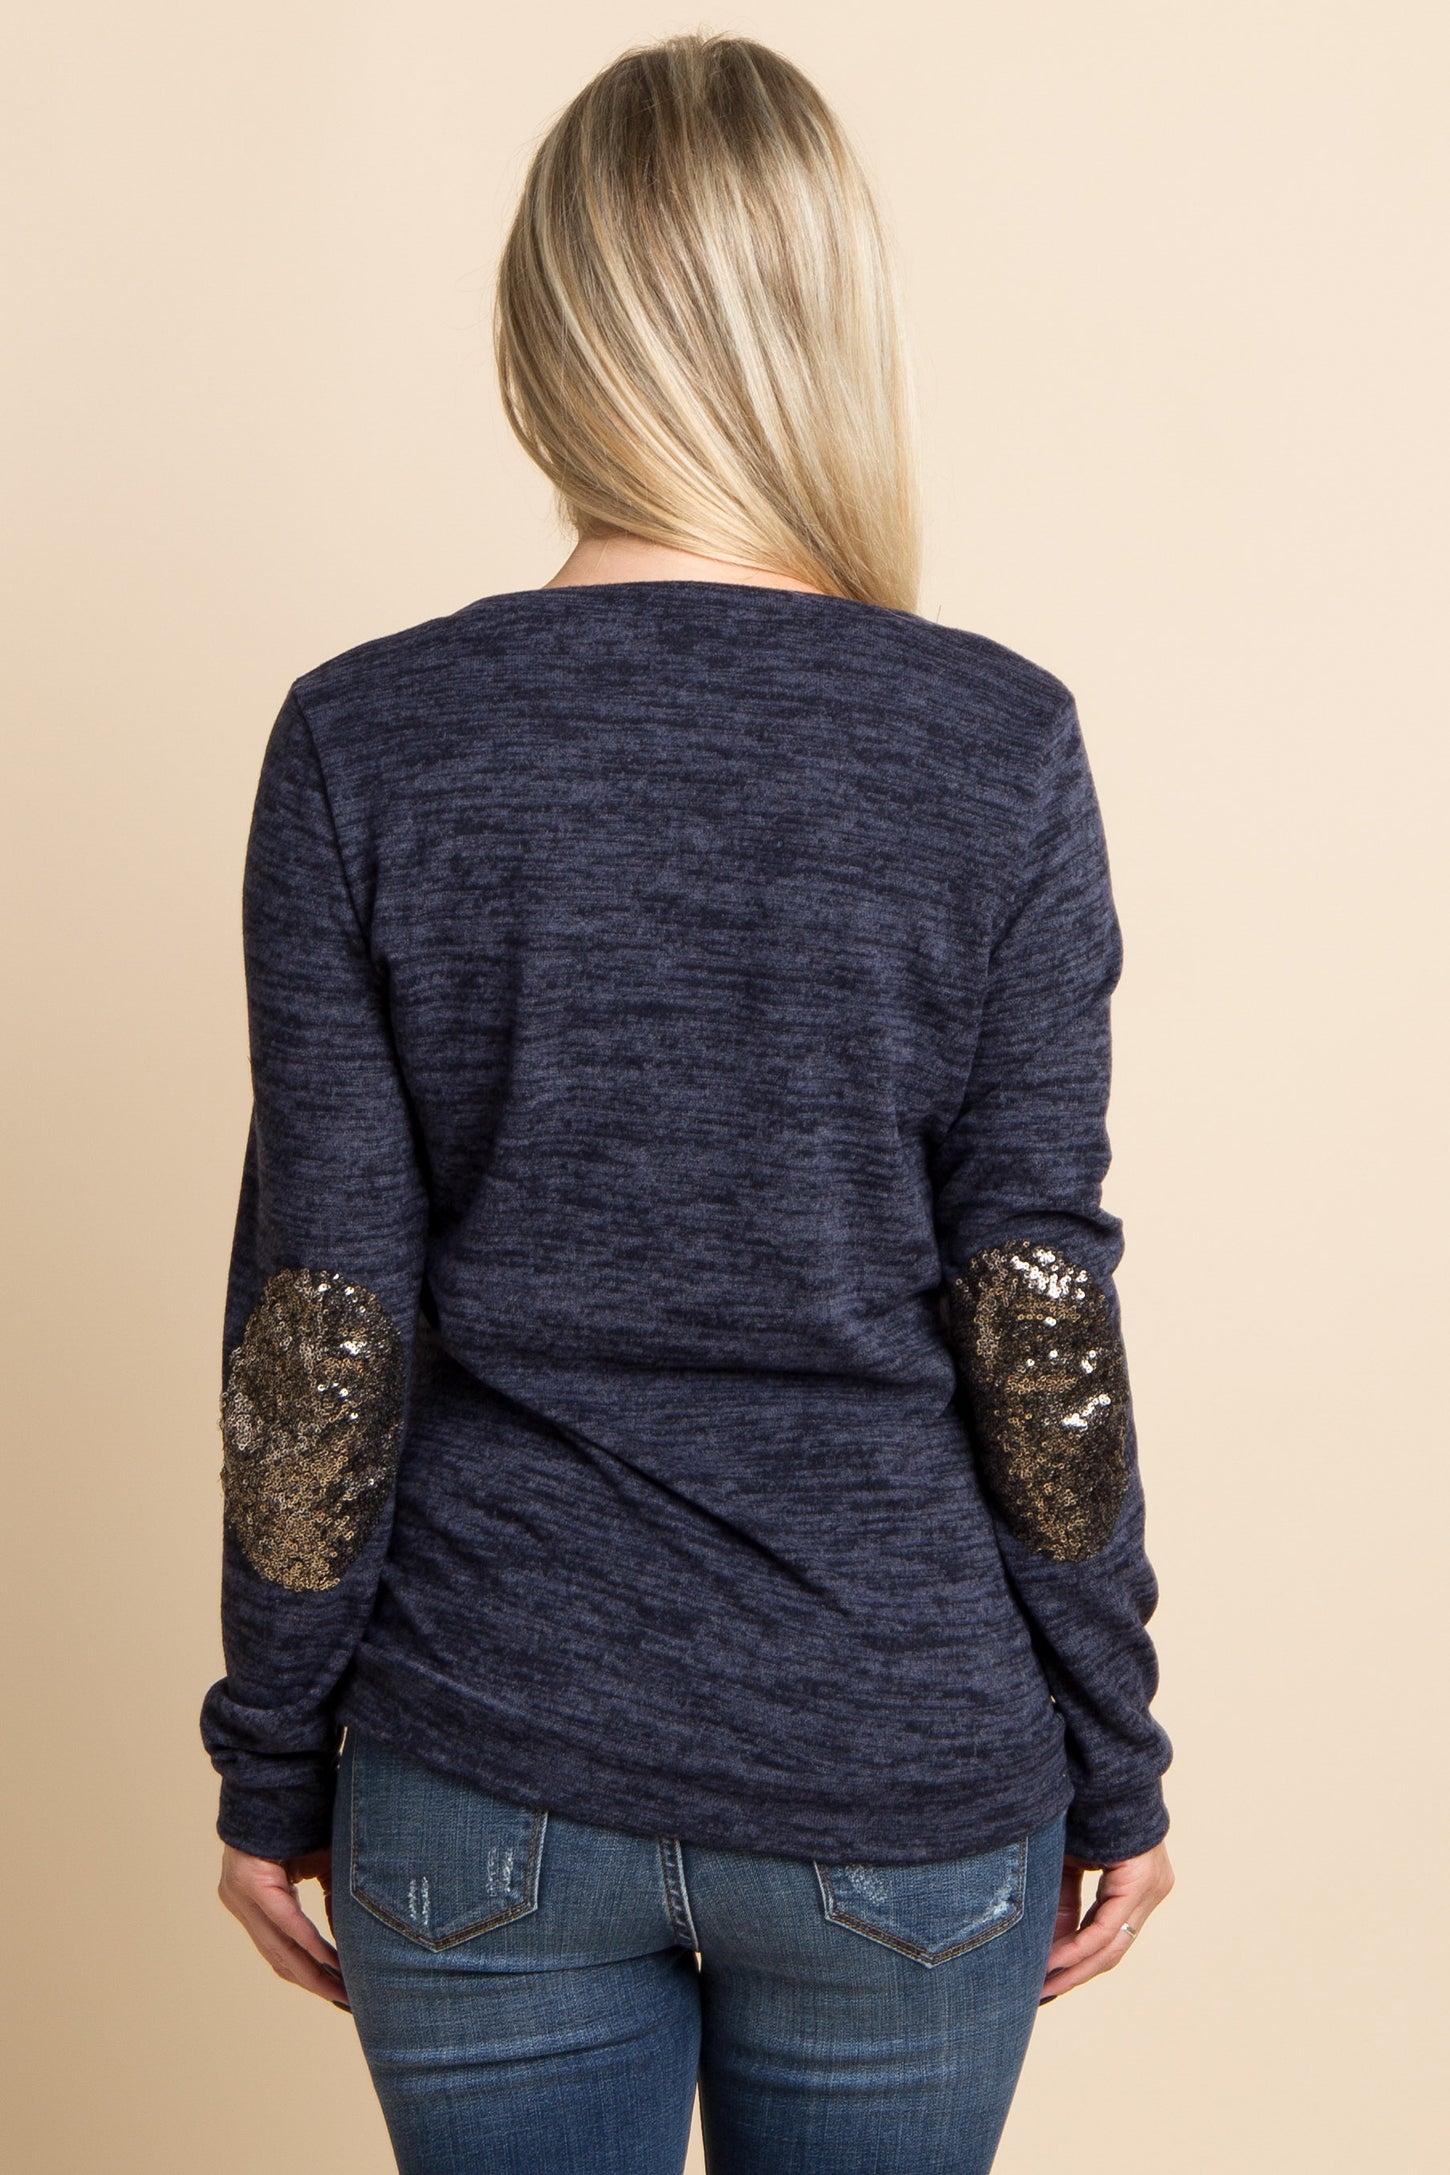 Navy Heathered Sequin Elbow Patch Maternity Sweater